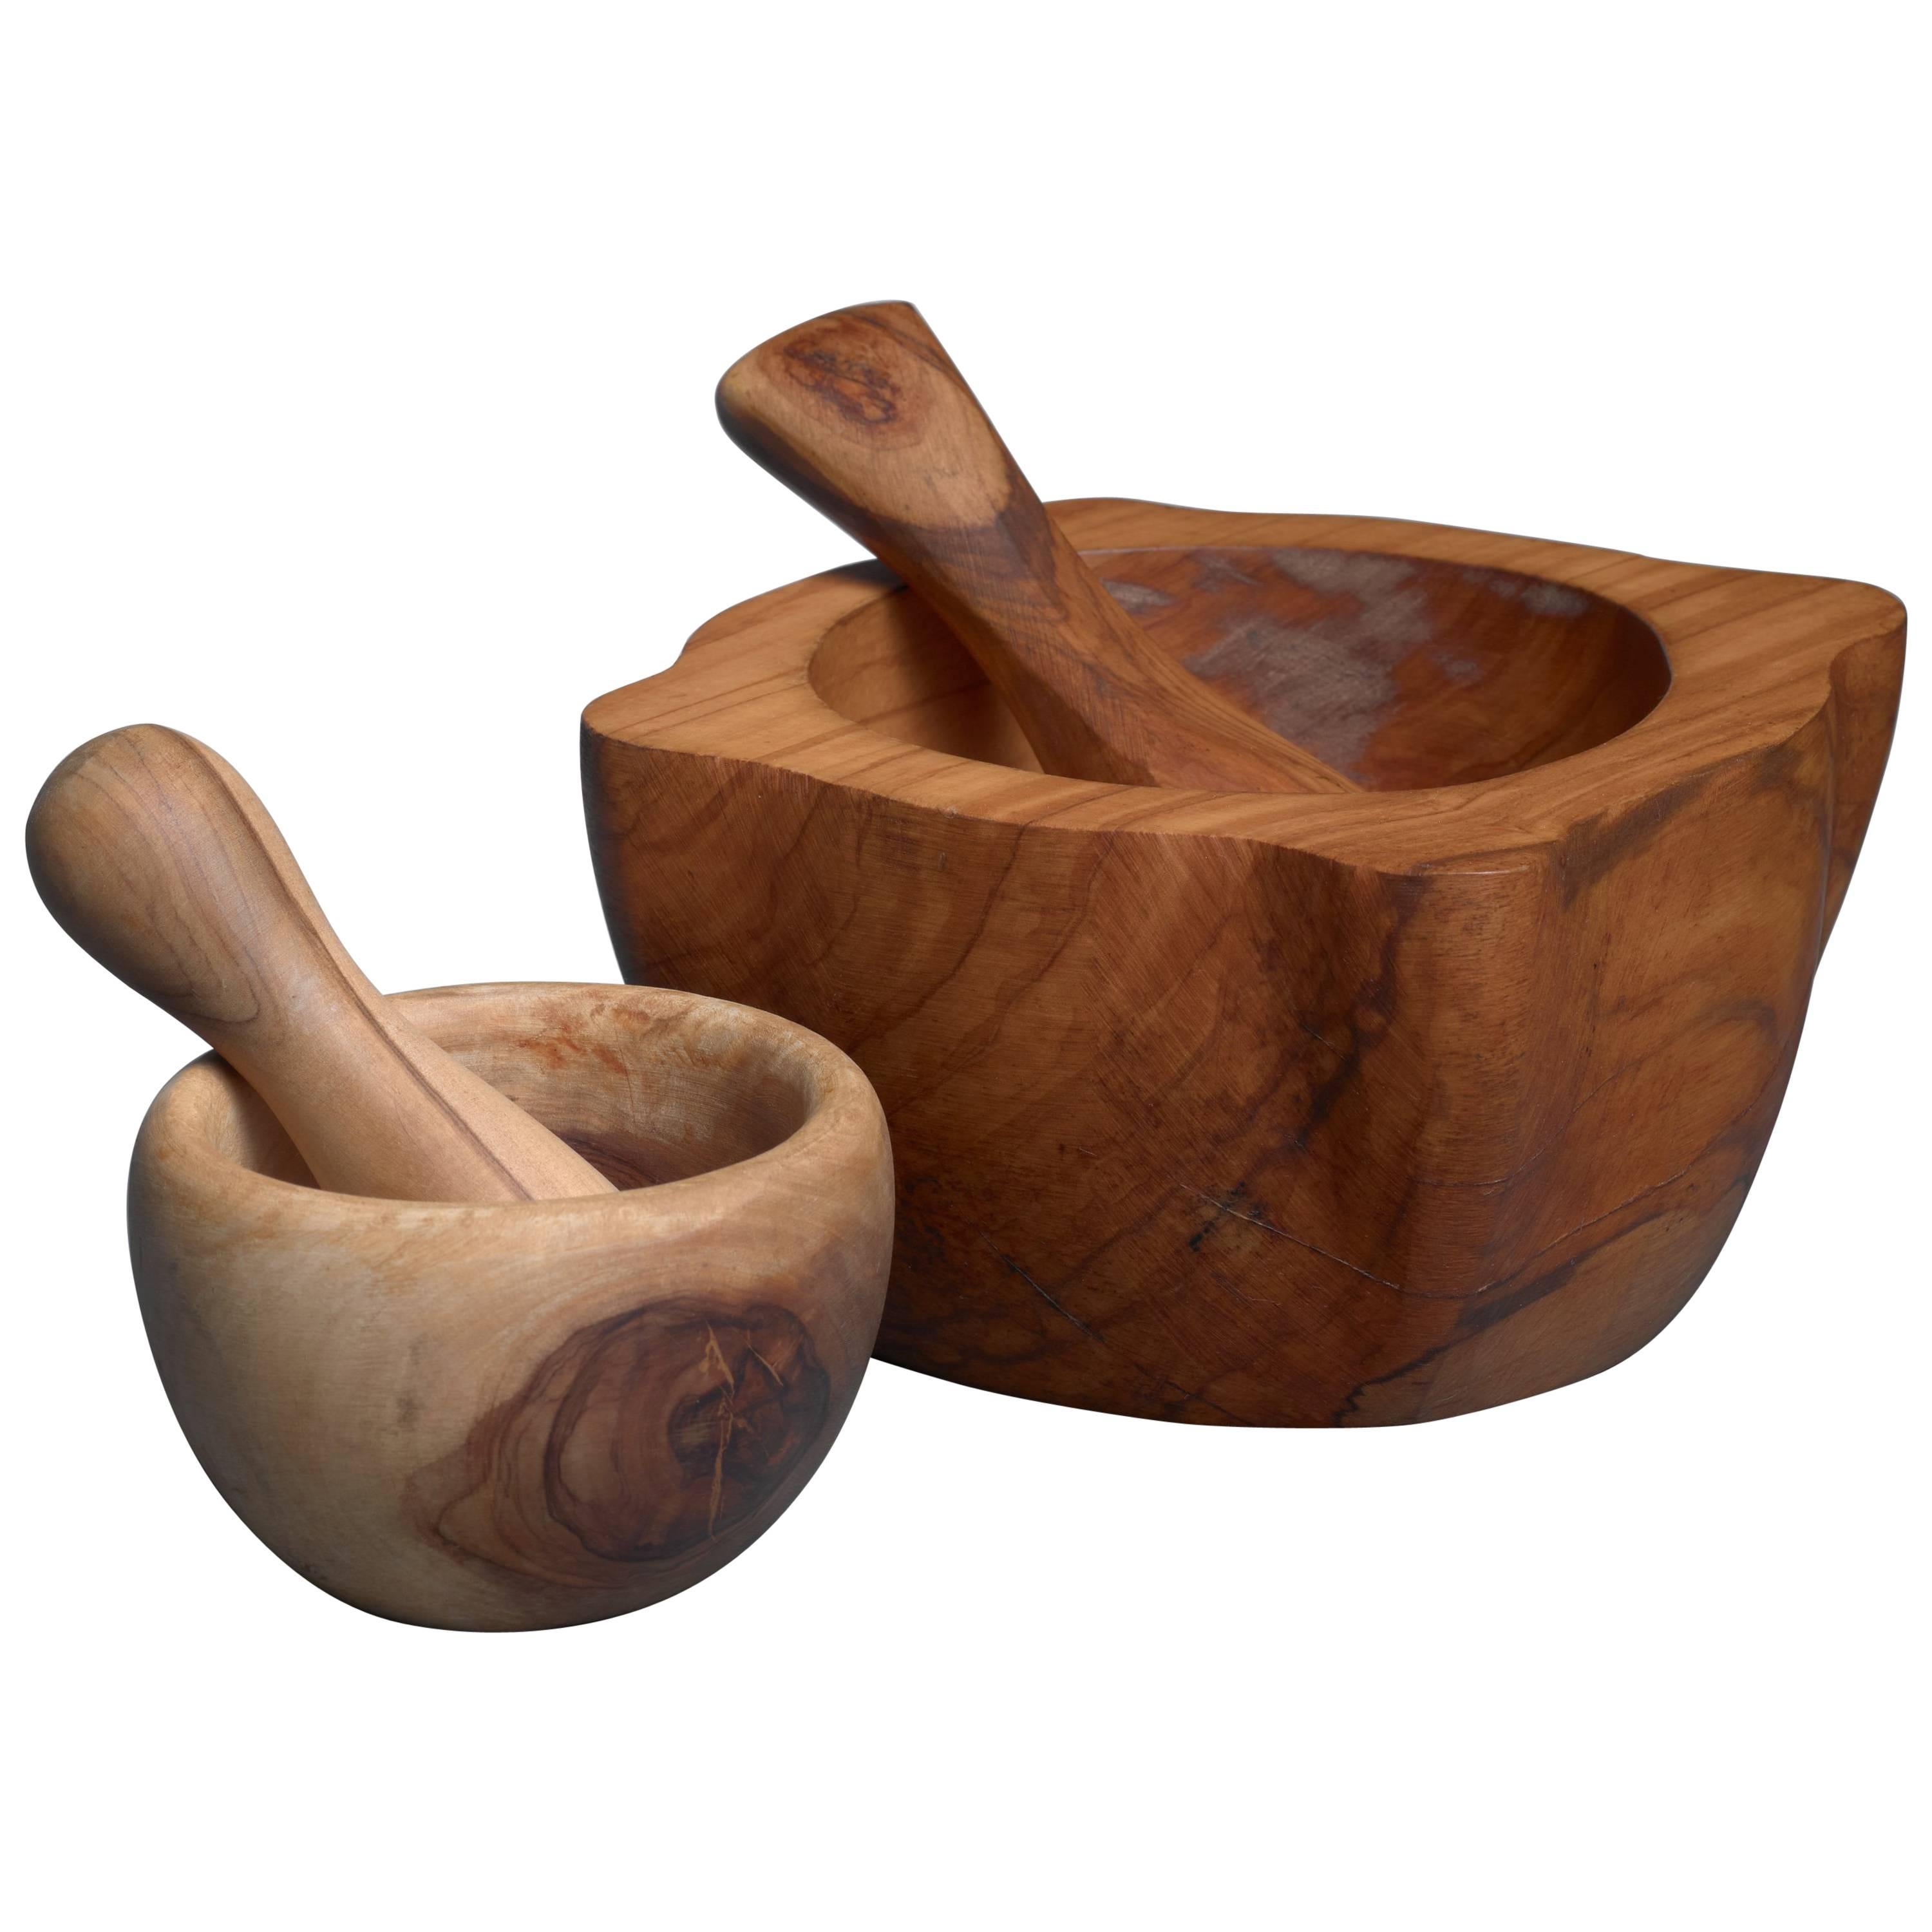 Pair of Wooden Mortar and Pestles, France, 1950s